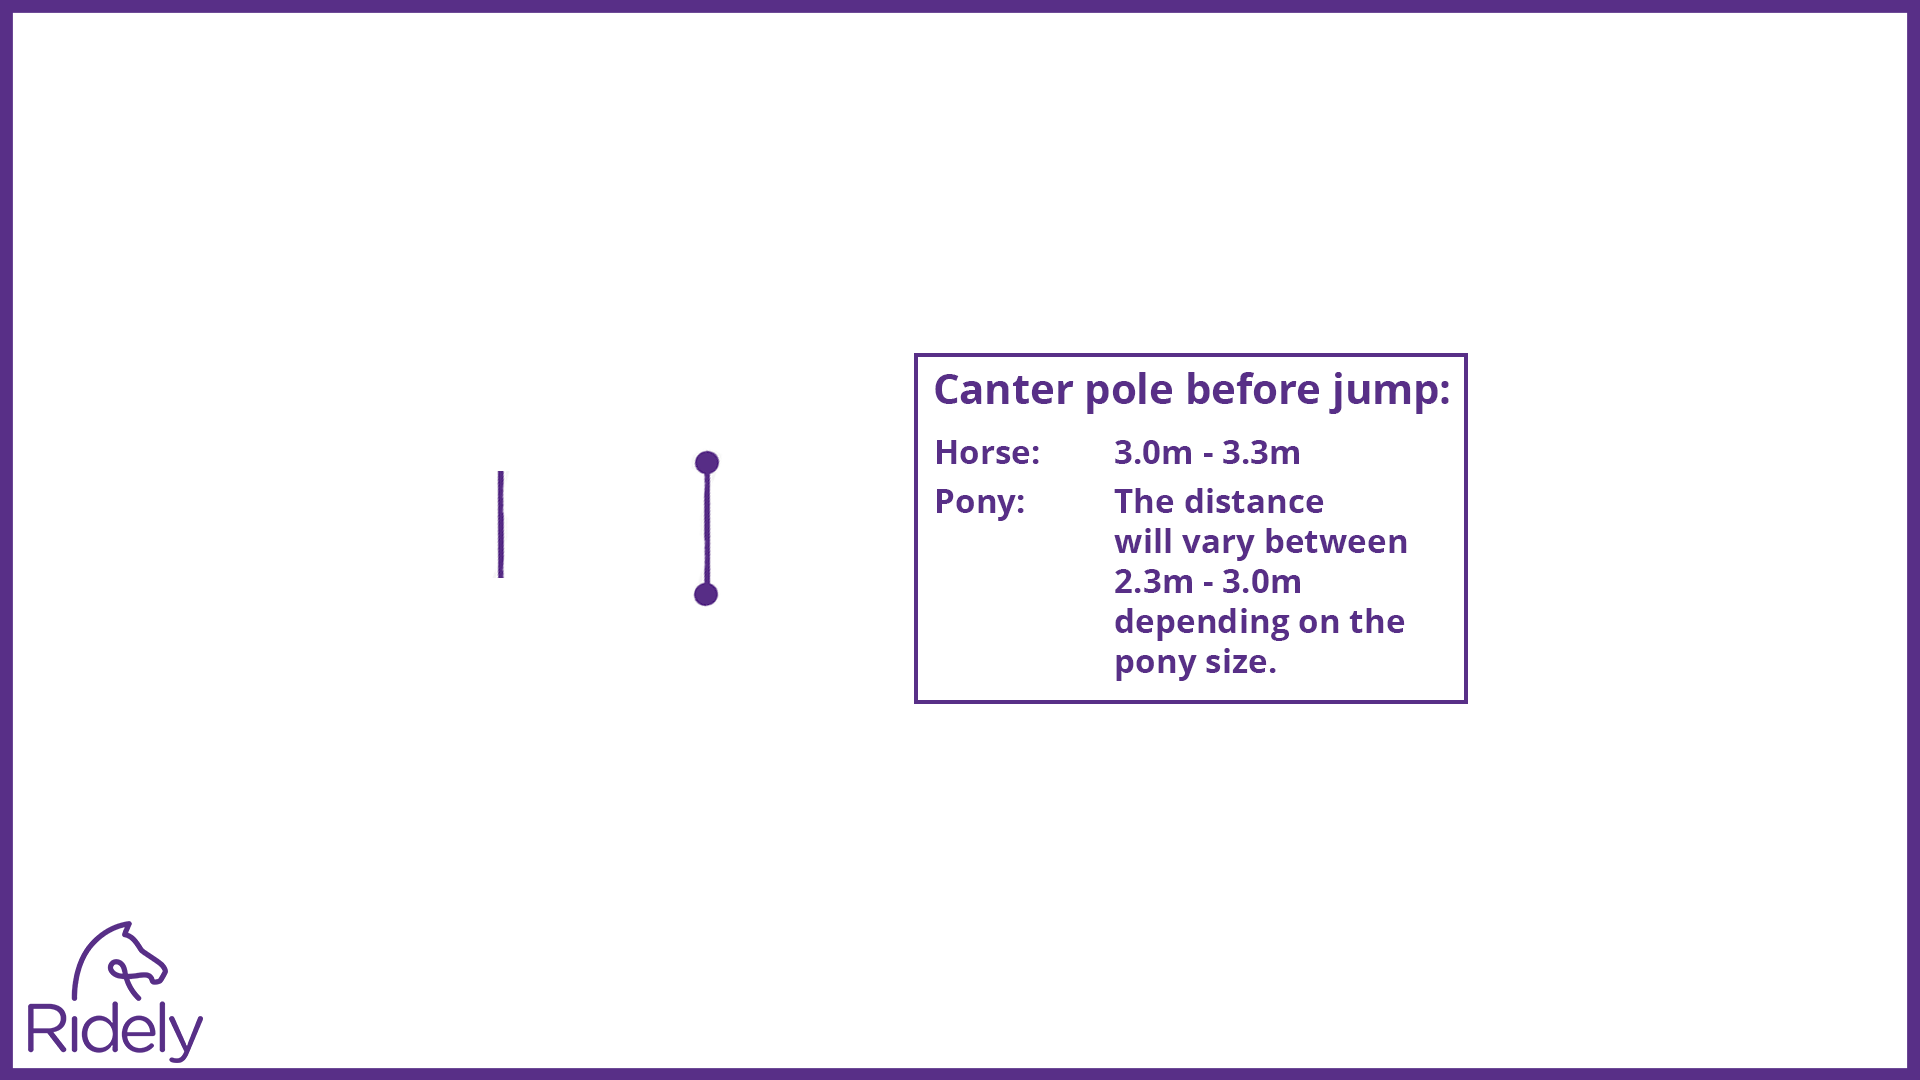 Canter pole before jump